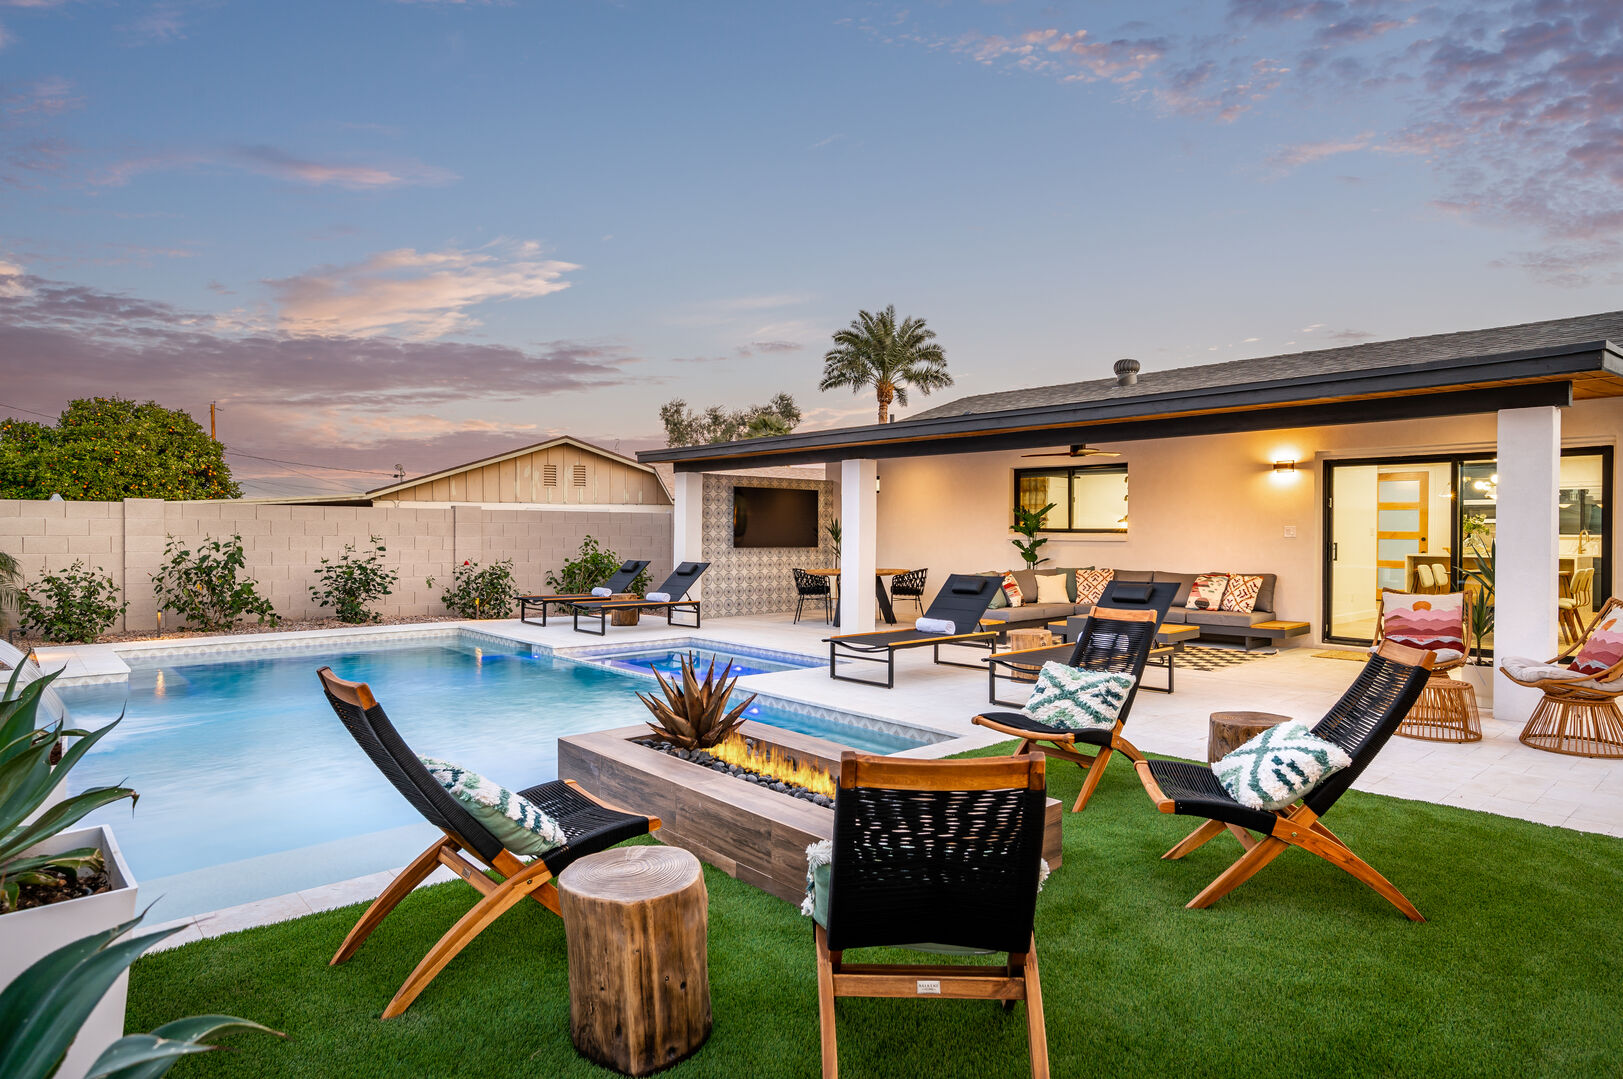 Gather around the fire pit or lounge by the pool.